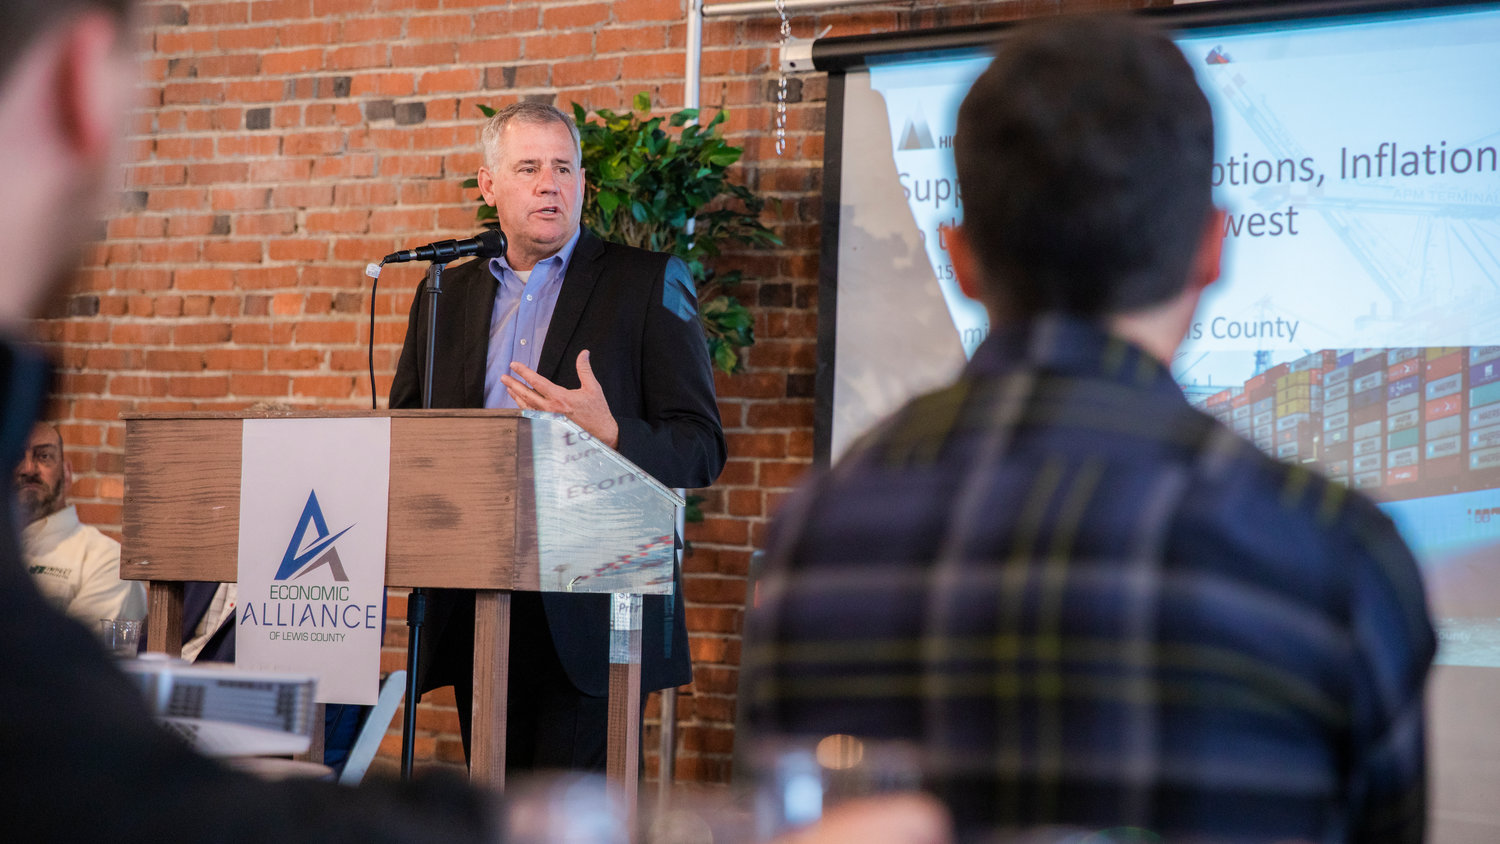 Richard DeBolt speaks to attendees inside The Loft for an Economic Alliance Summit event in Chehalis on Thursday.